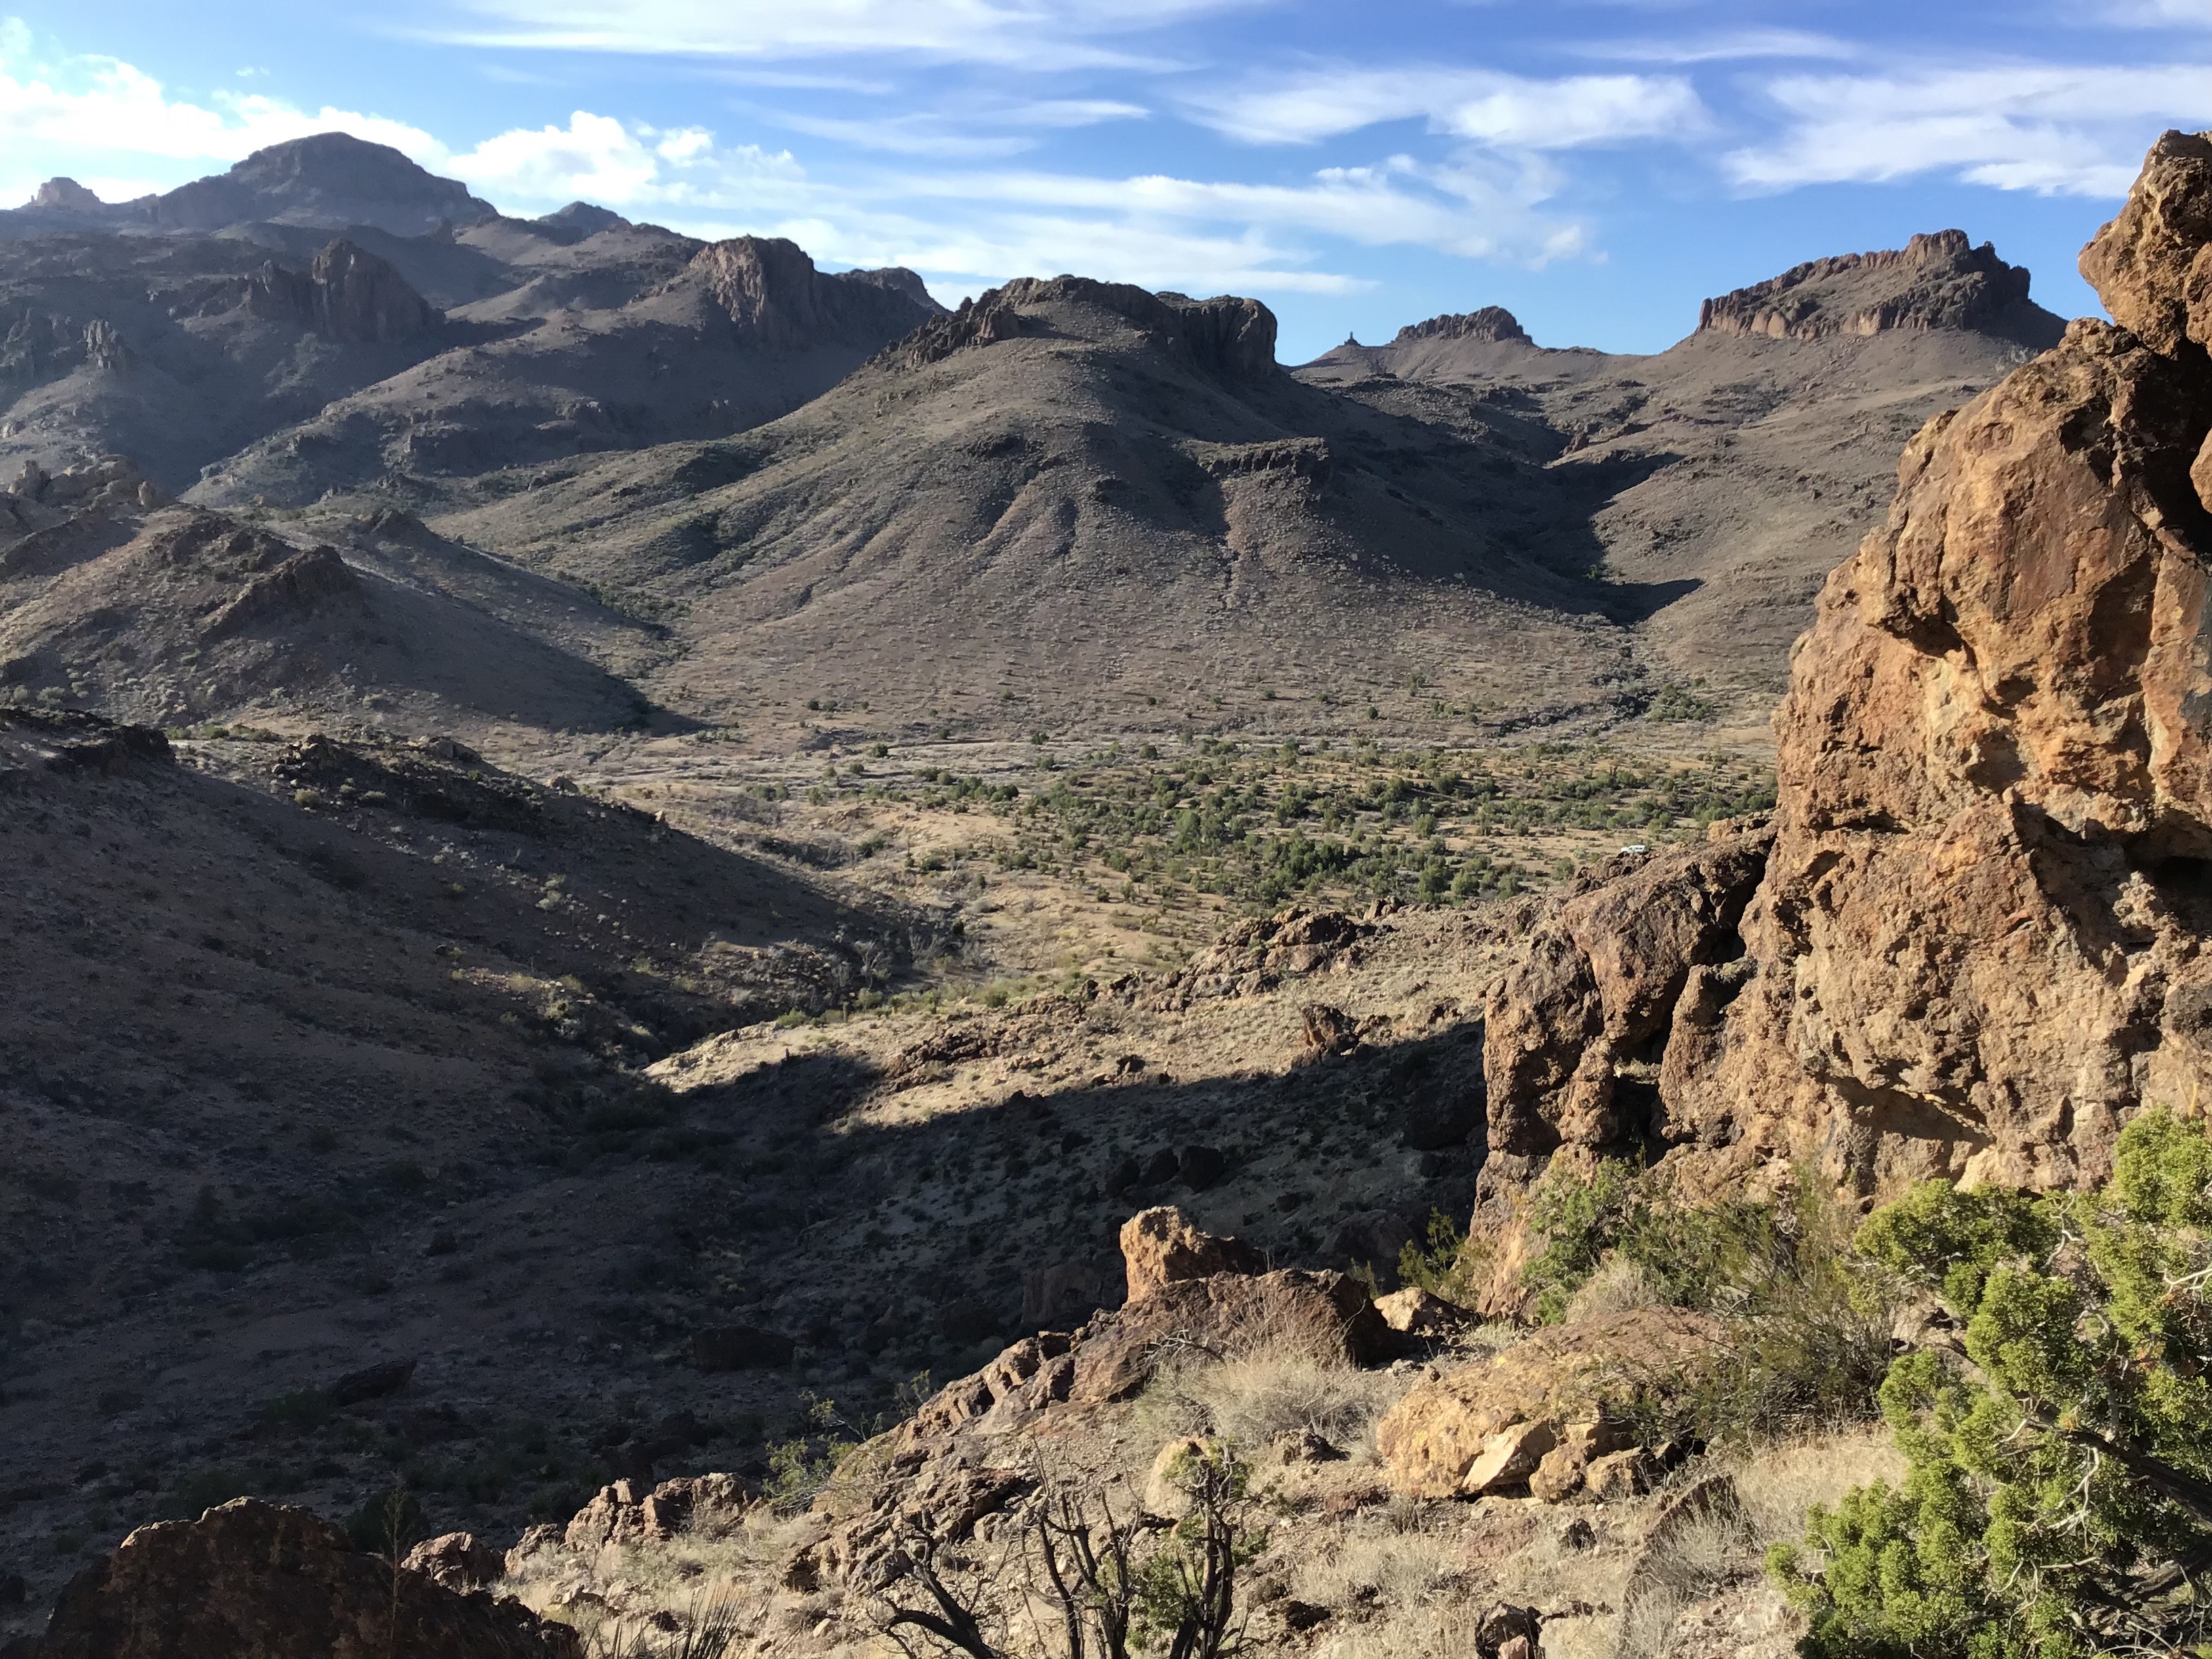 Looking southwest, across Secret Pass Wash towards the junction of the Secret Pass, Union Pass (west), Mt Nutt (south), and Oatman (southwest) 7.5’ quadrangles.  The ridge is composed of 18-19Ma  andesitic and dacitic lavas at the base of the Miocene volcanic section.